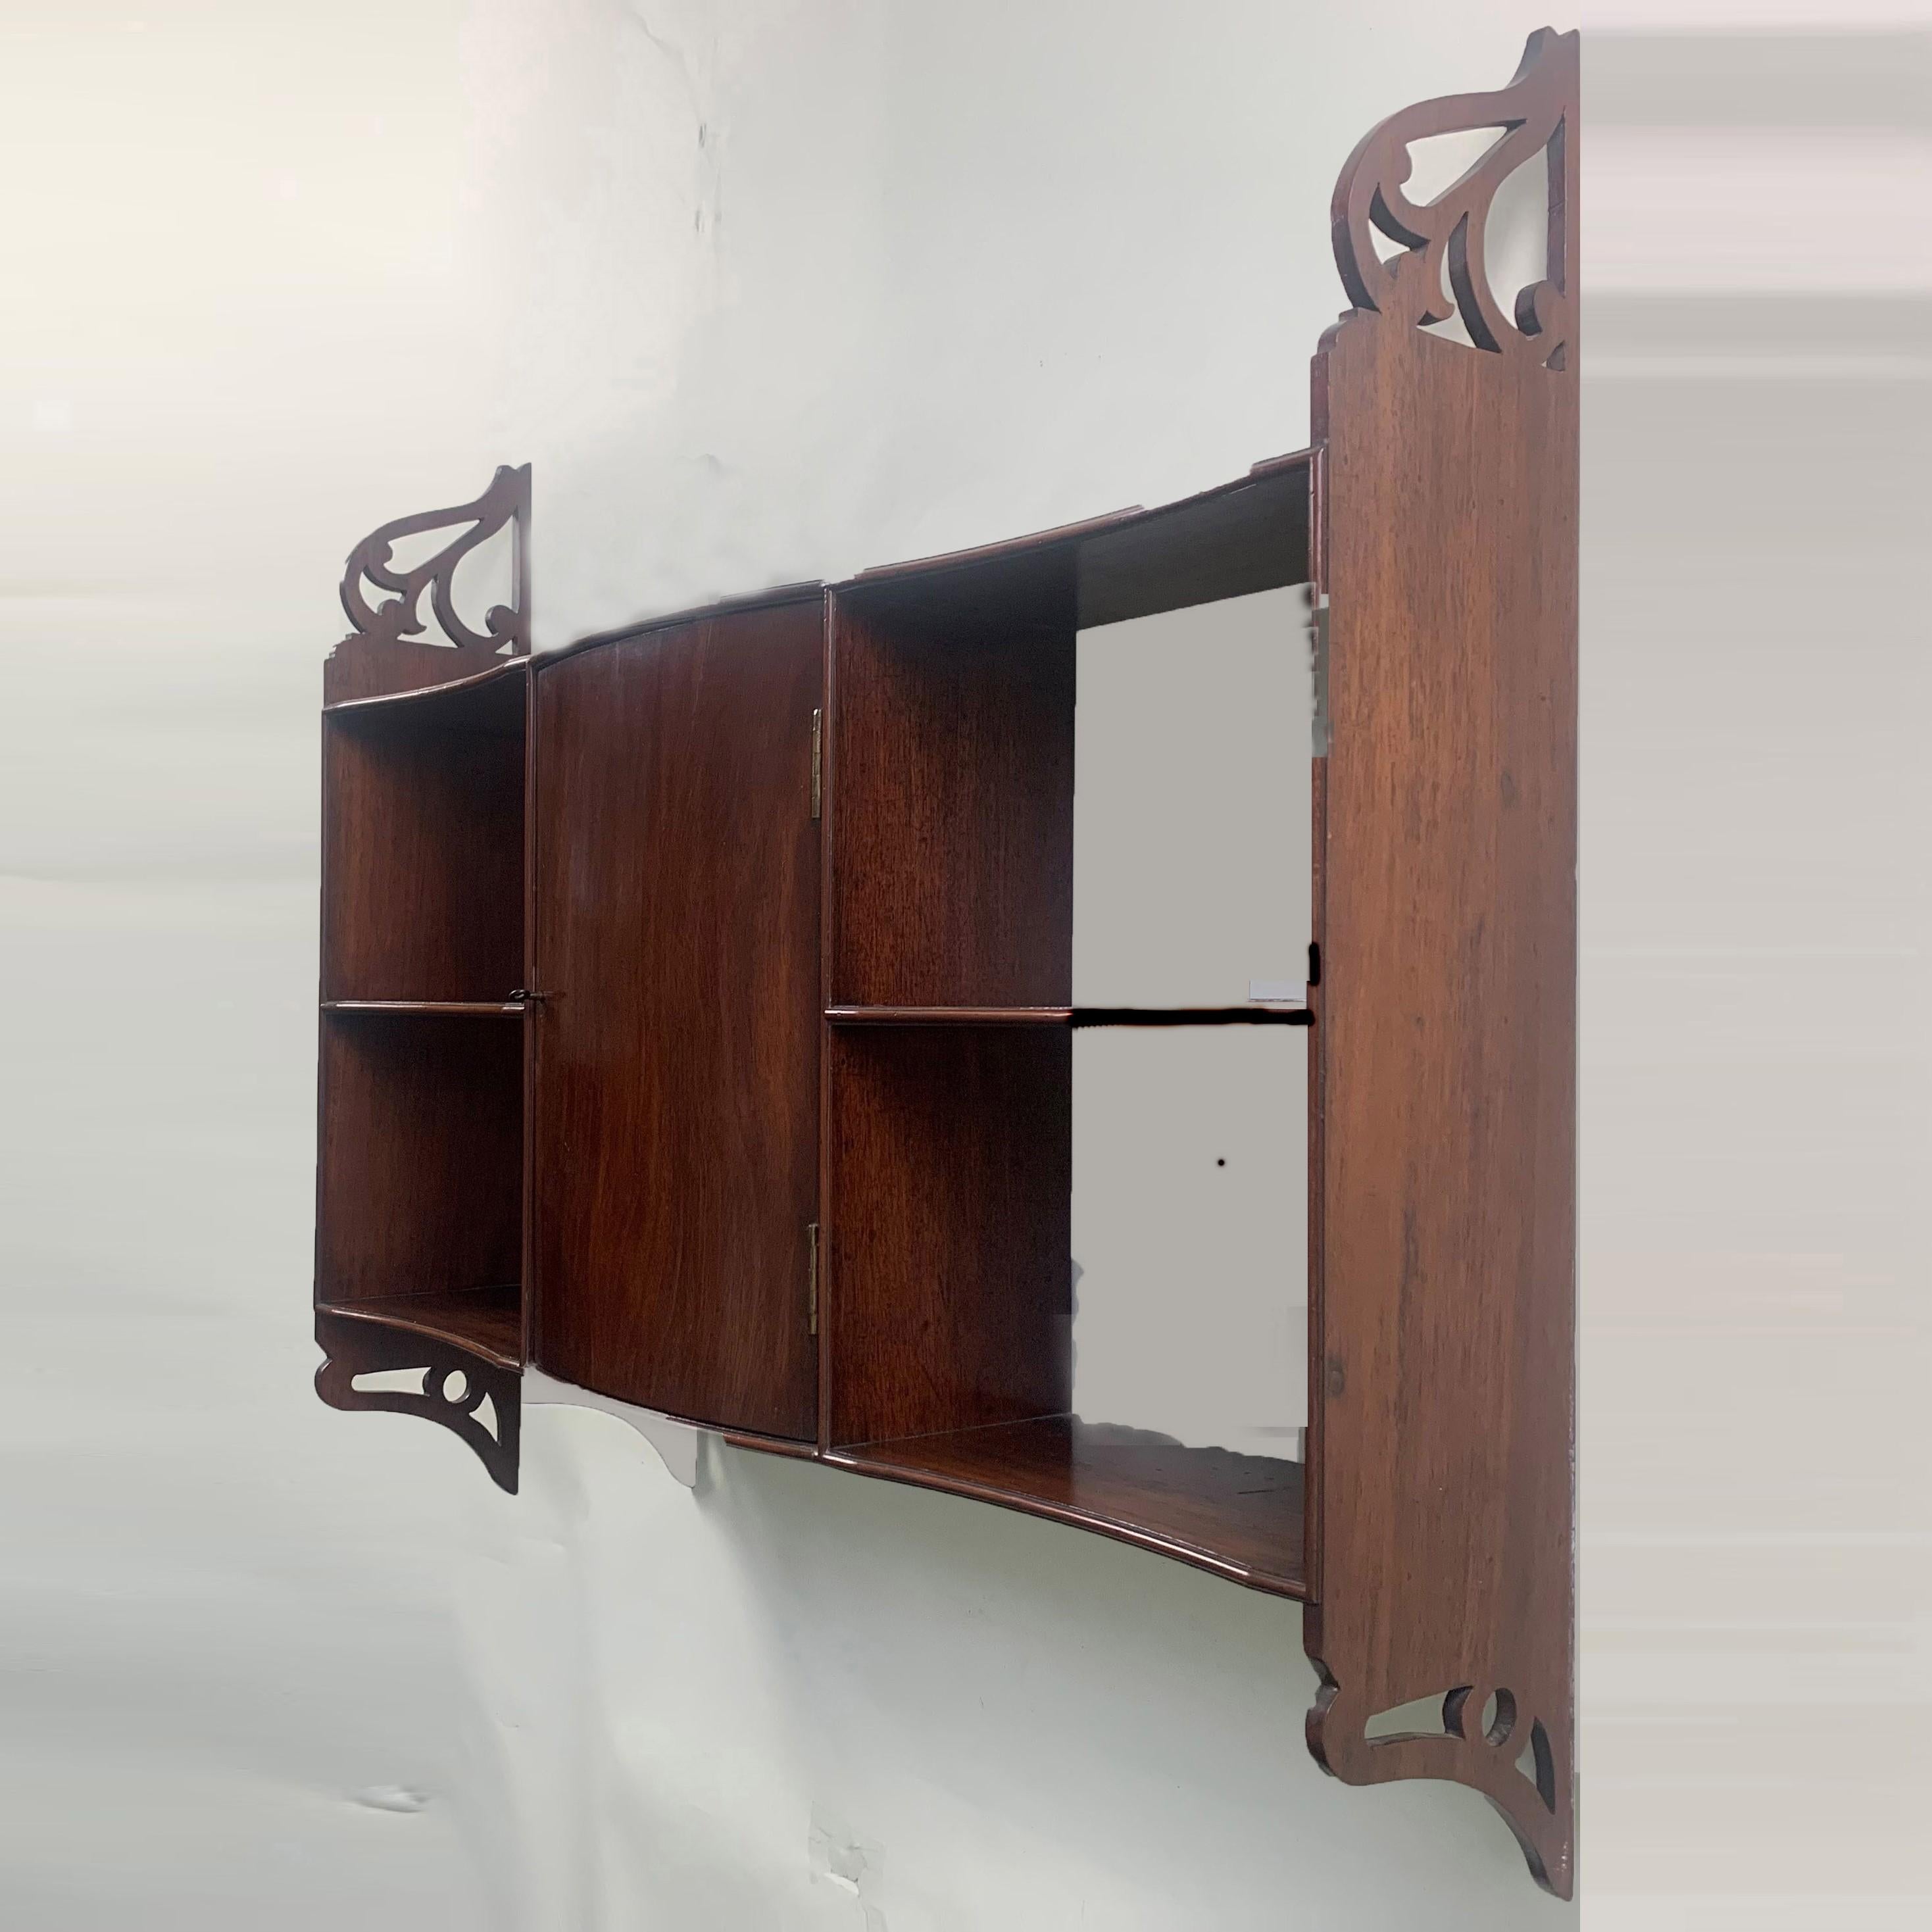 An unusual and attractive George III period set of serpentine fronted mahogany hanging wall shelves. With central, bow-fronted cupboard door and shelves either side, joined by fret-cut sides.